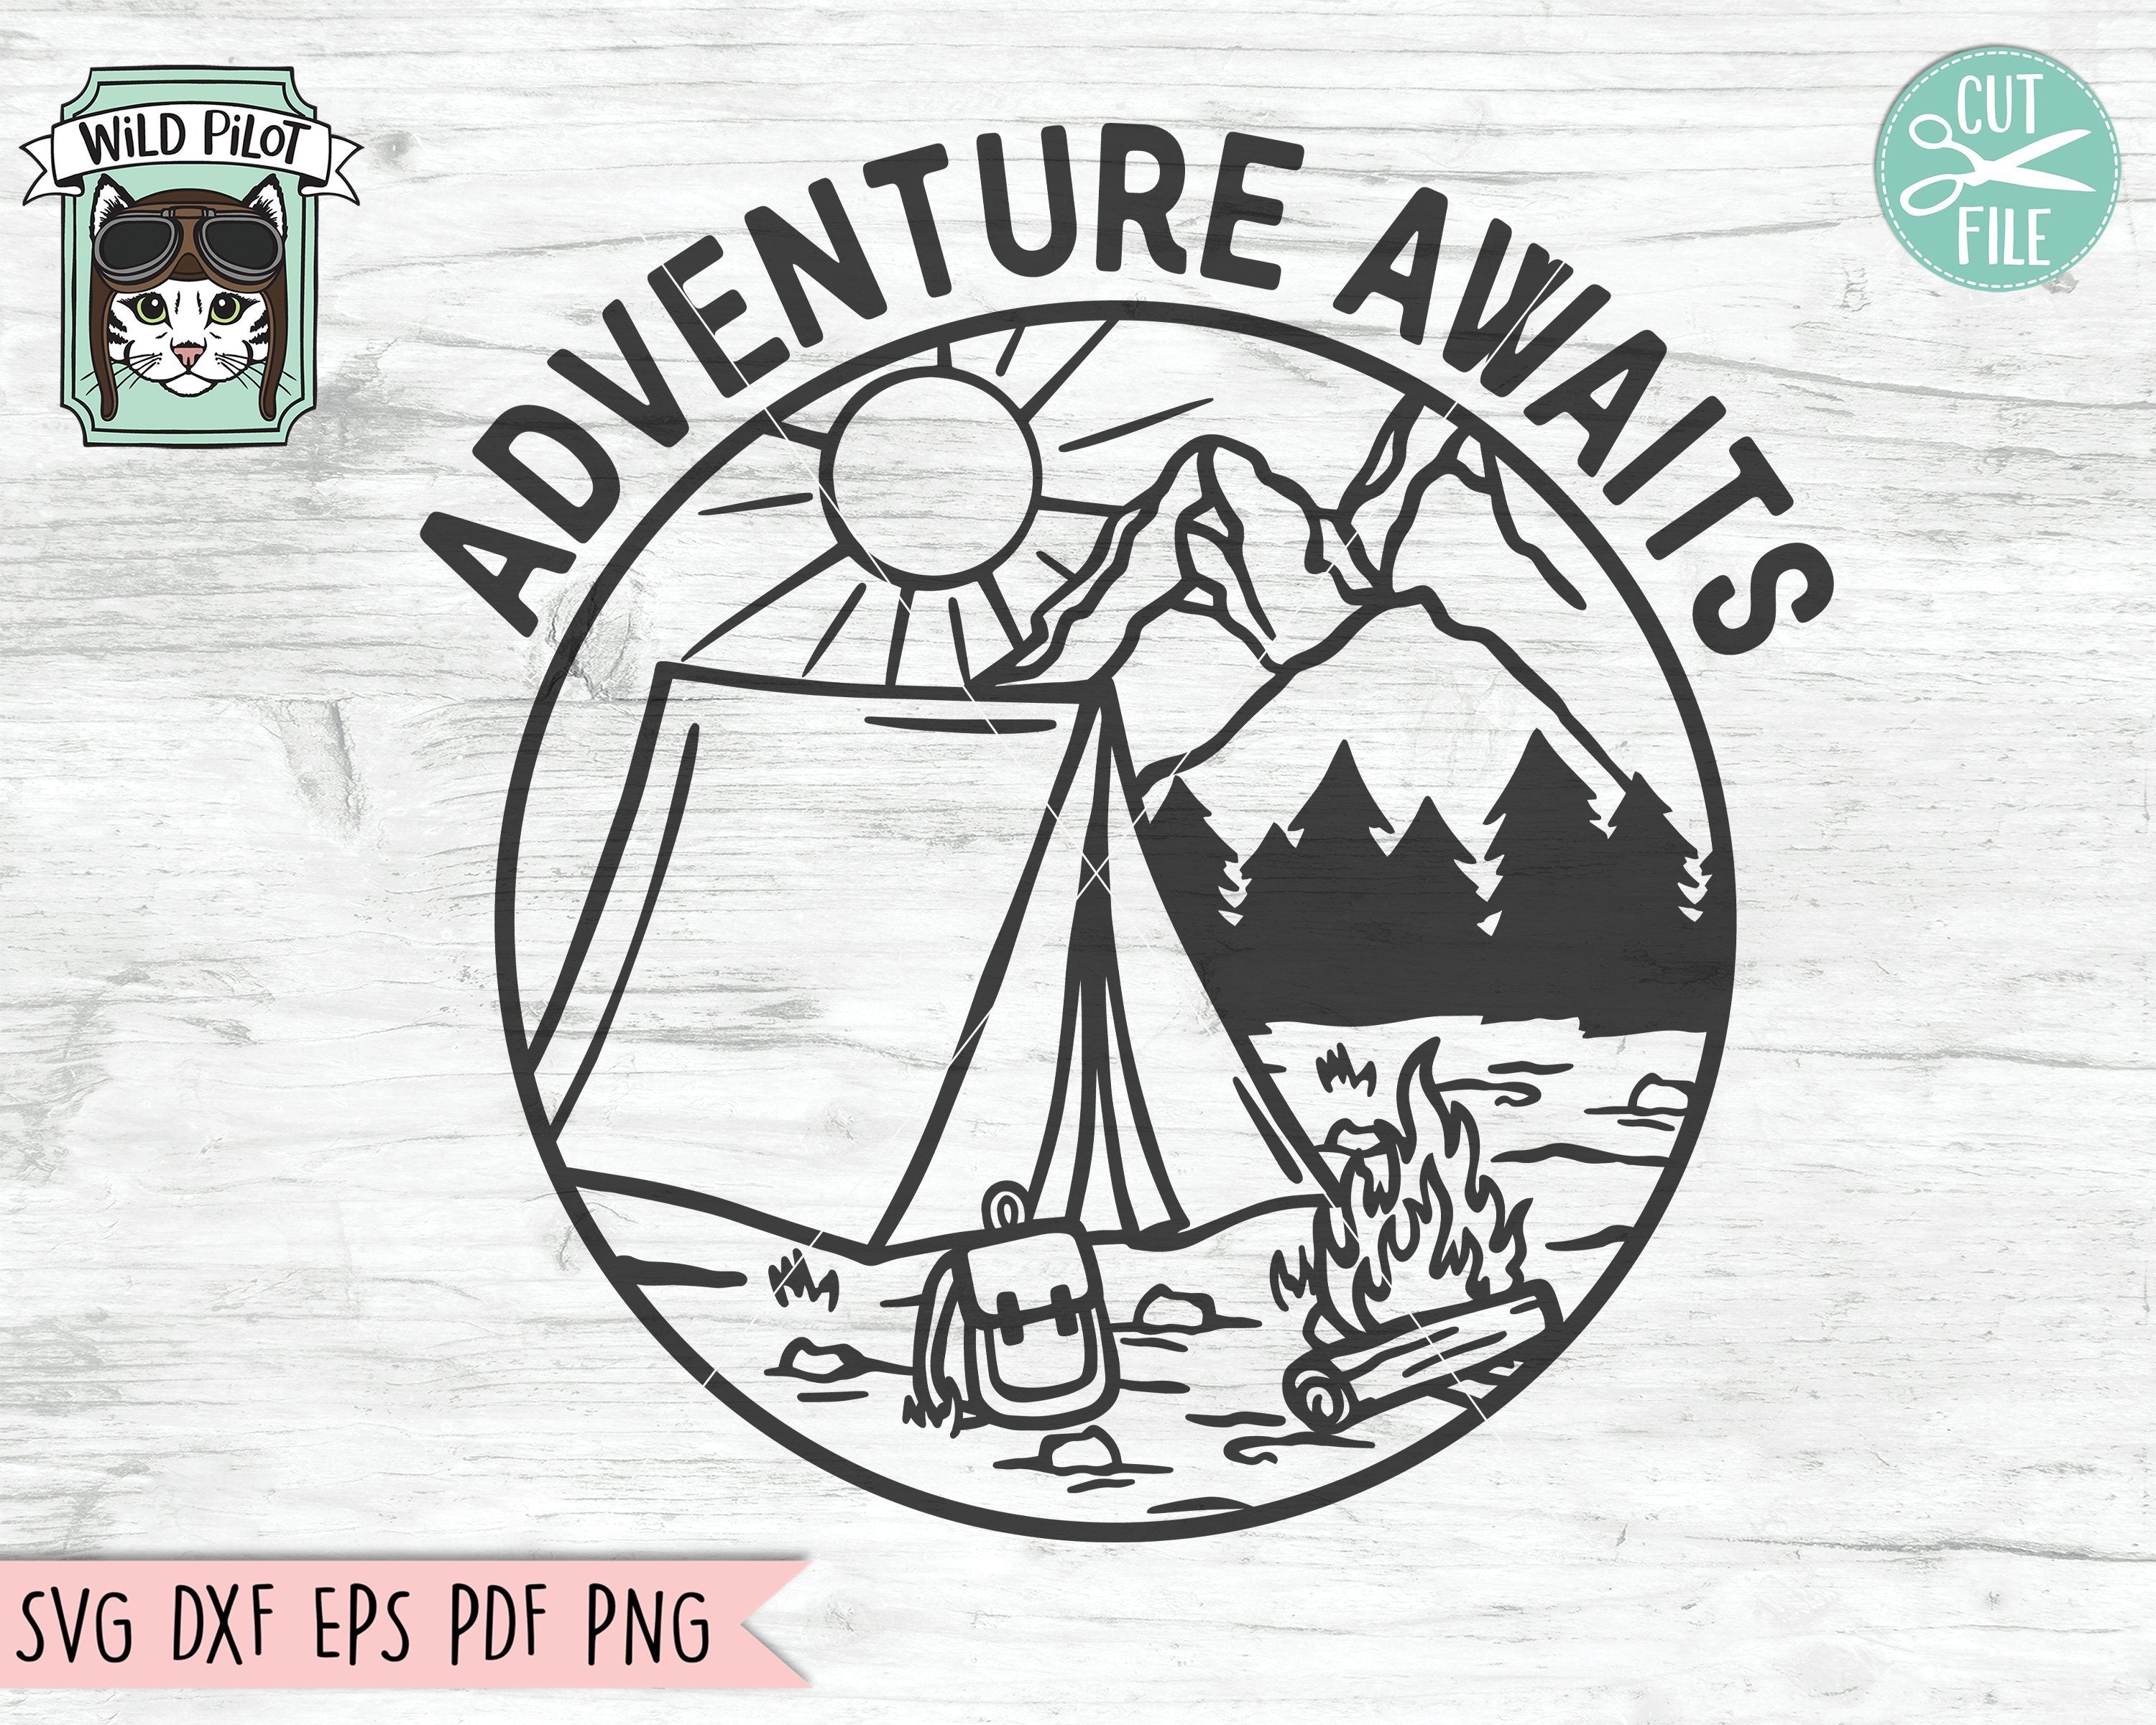 Download Adventure Awaits Svg File Camping Tent Svg File Tent Cut File Camping Svg Camping Mountain Scene Camping Patch Svg Camping Cut File So Fontsy